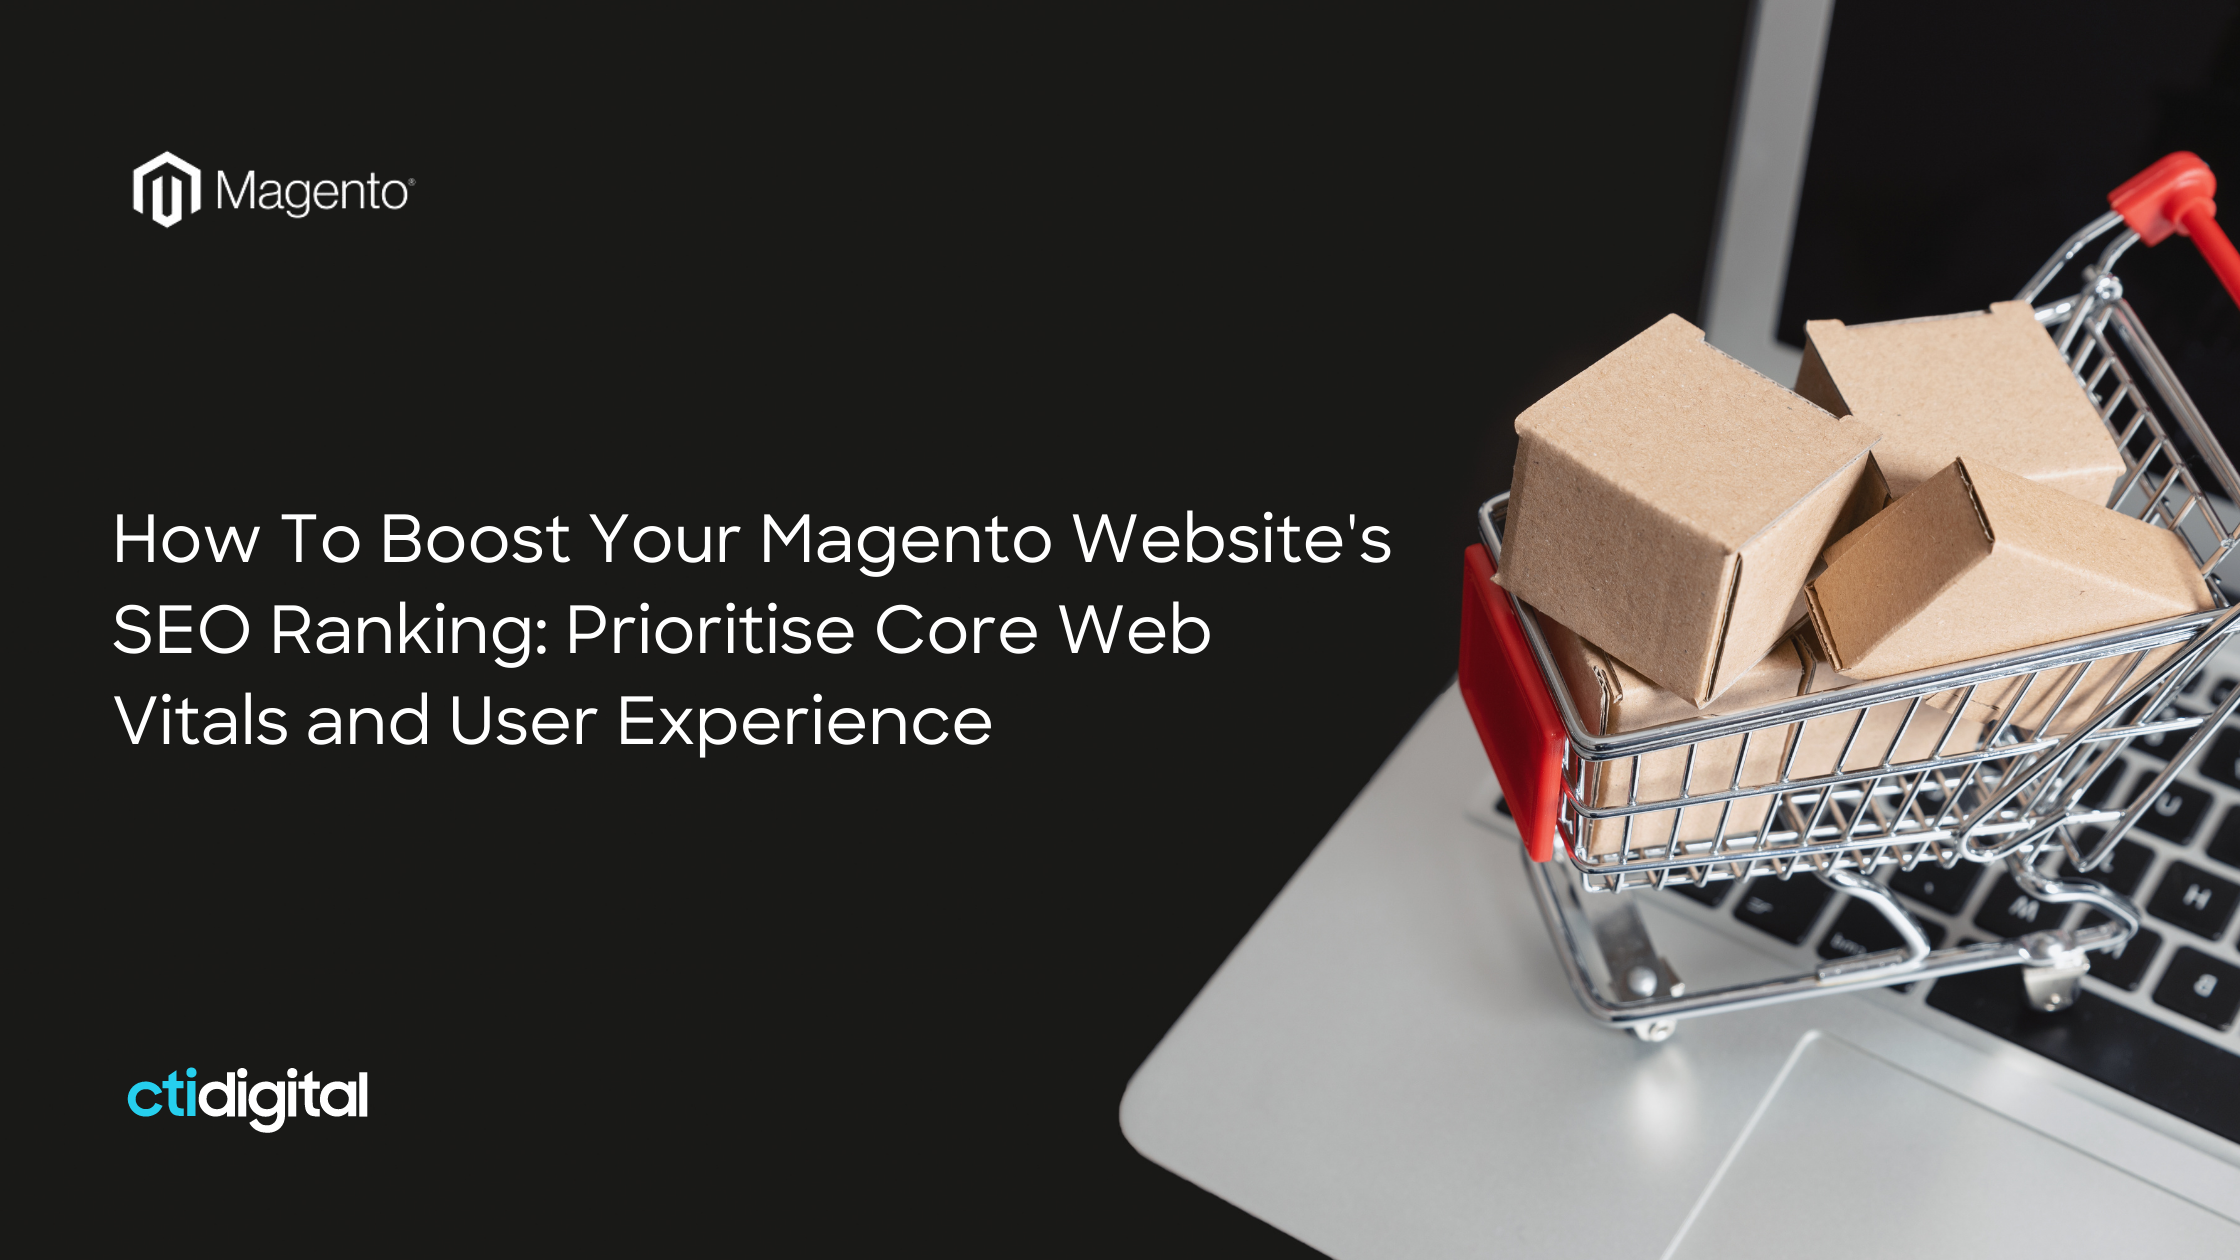 How To Boost Your Magento Website’s SEO Ranking: Prioritise Core Web Vitals and User Experience